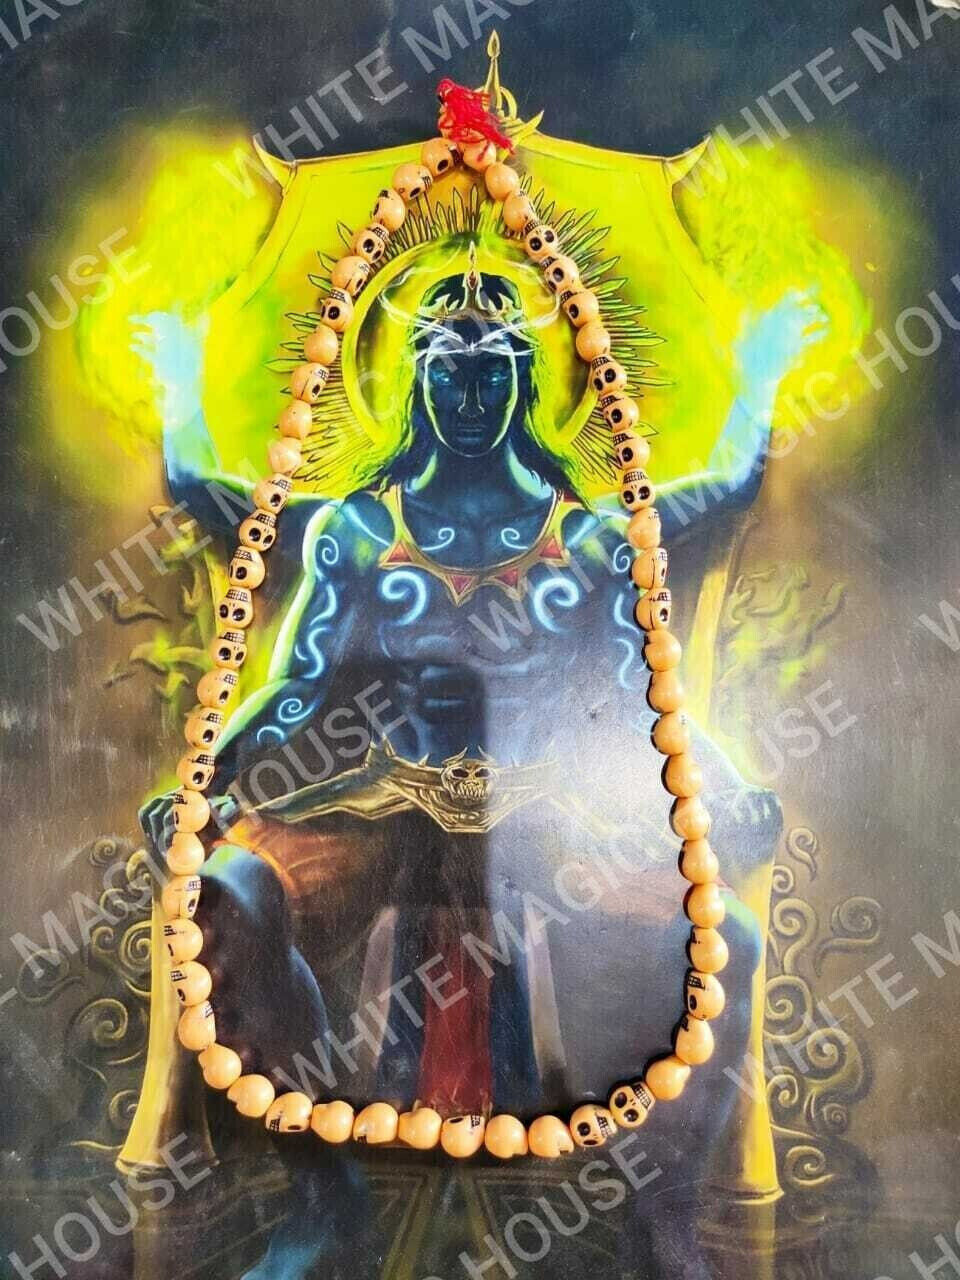 Real Aghori Made Kali Ashta Siddhi Necklace - Obtain 7 Occult Phic Powers A++